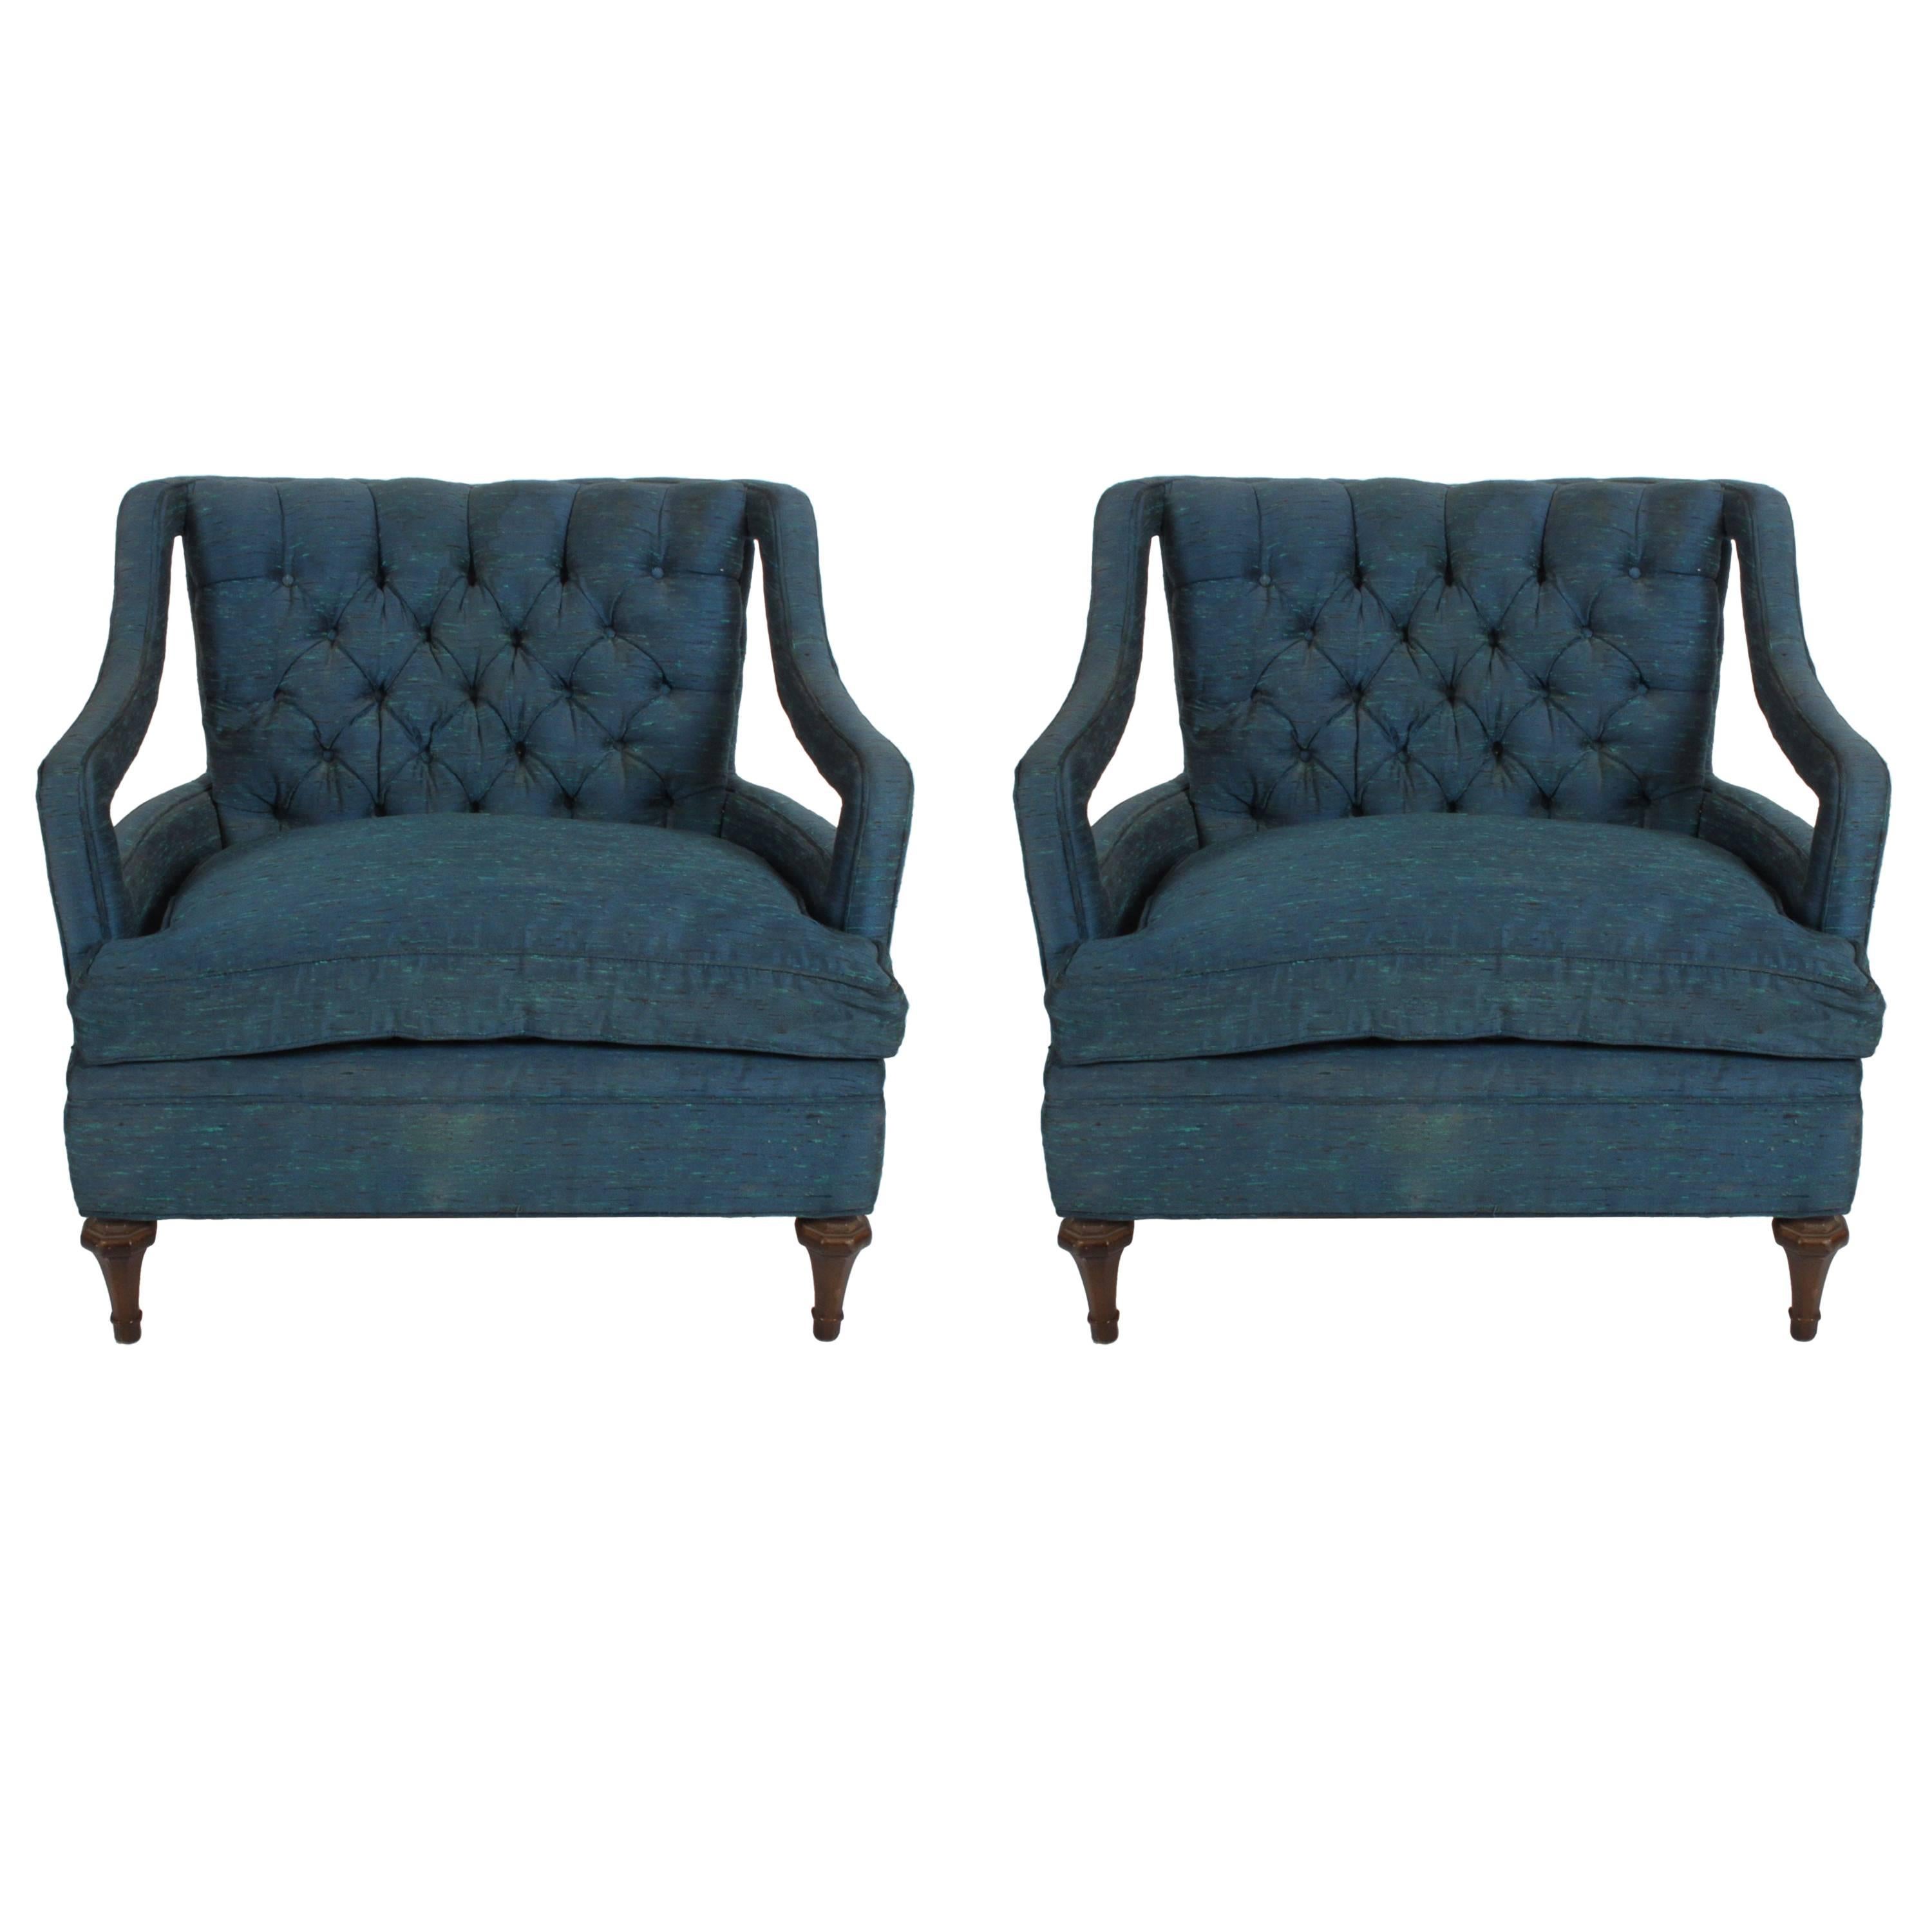 Pair of Glamorous Hollywood Regency Lounge Chairs